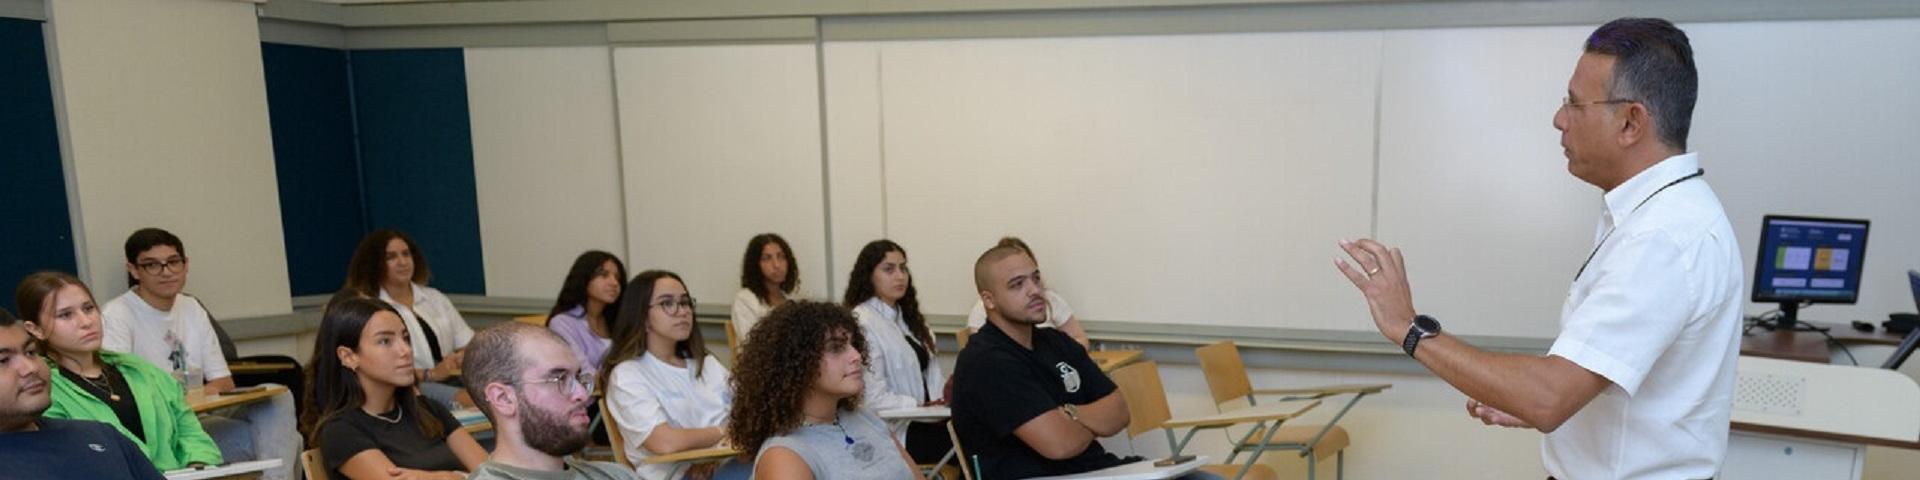 Faculty and Students in class